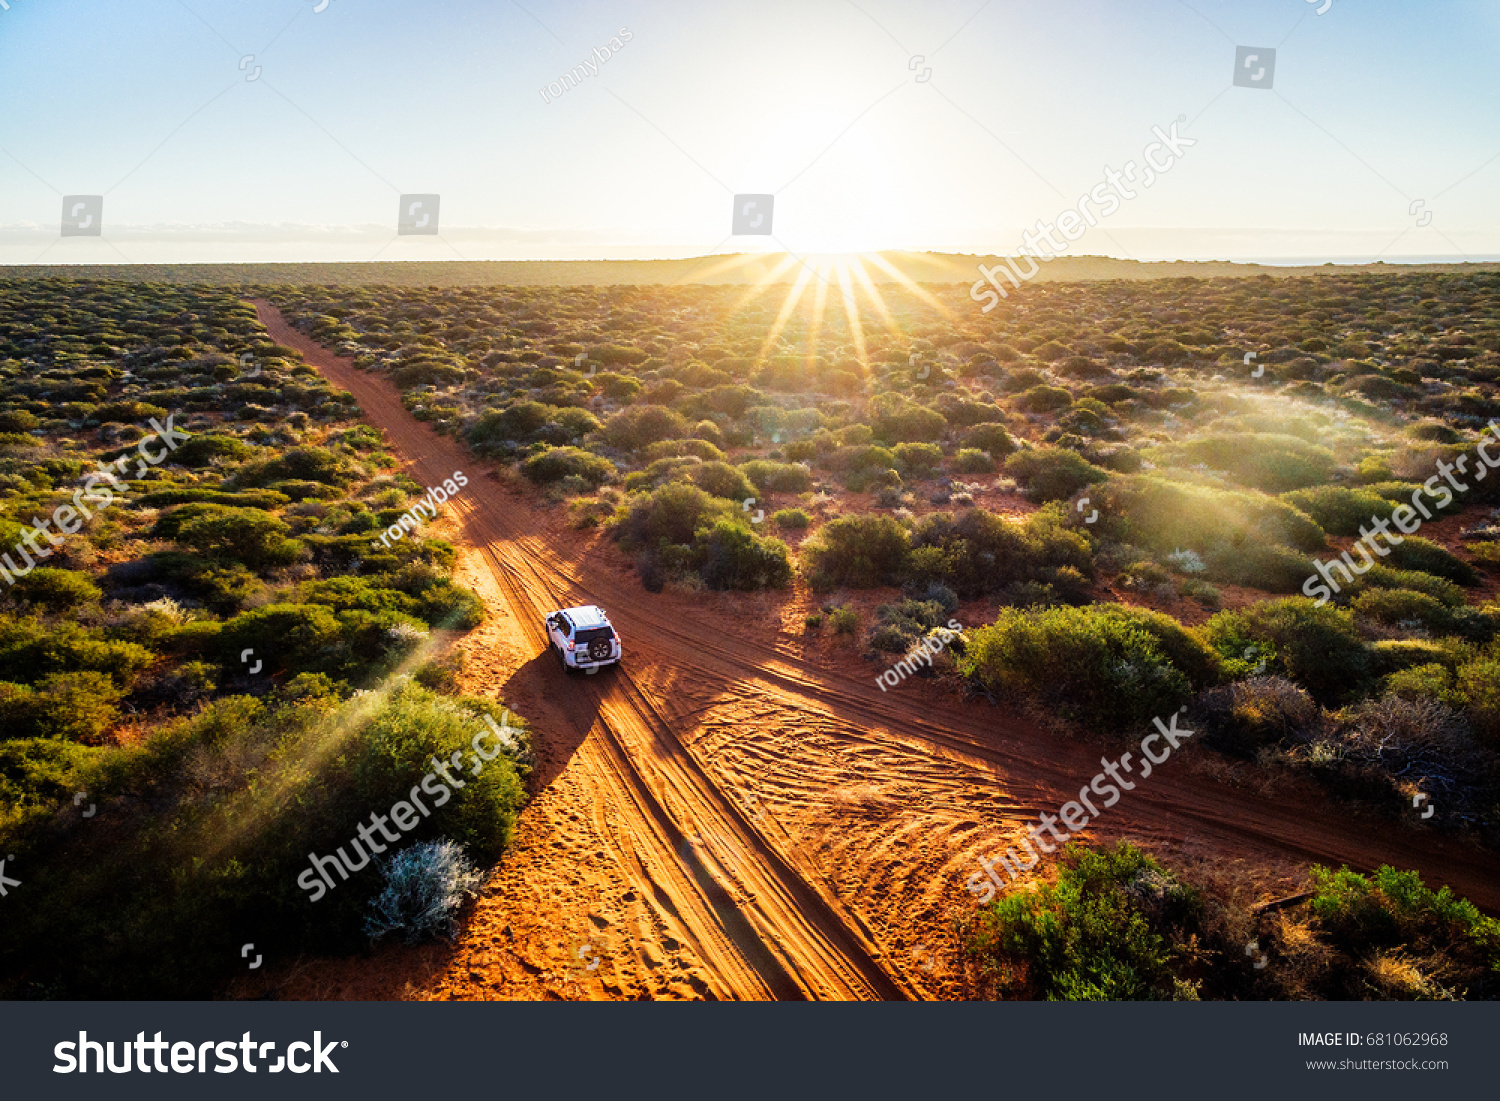 Australia, red sand unpaved road and 4x4 at sunset, Francoise Peron, Shark Bay #681062968